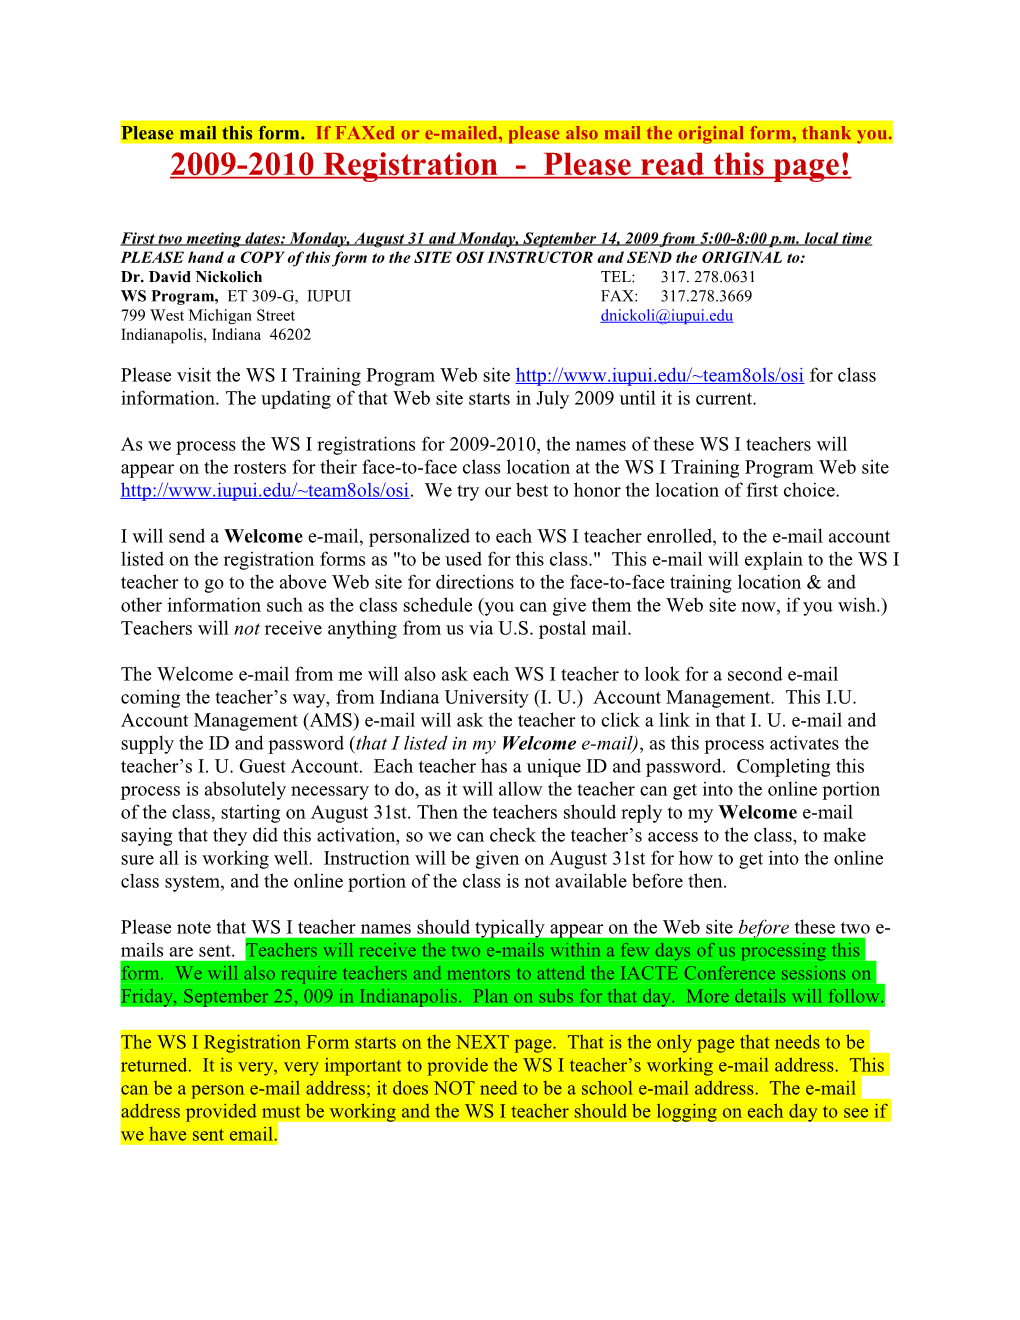 2009-2010 Registration - Please Read This Page!